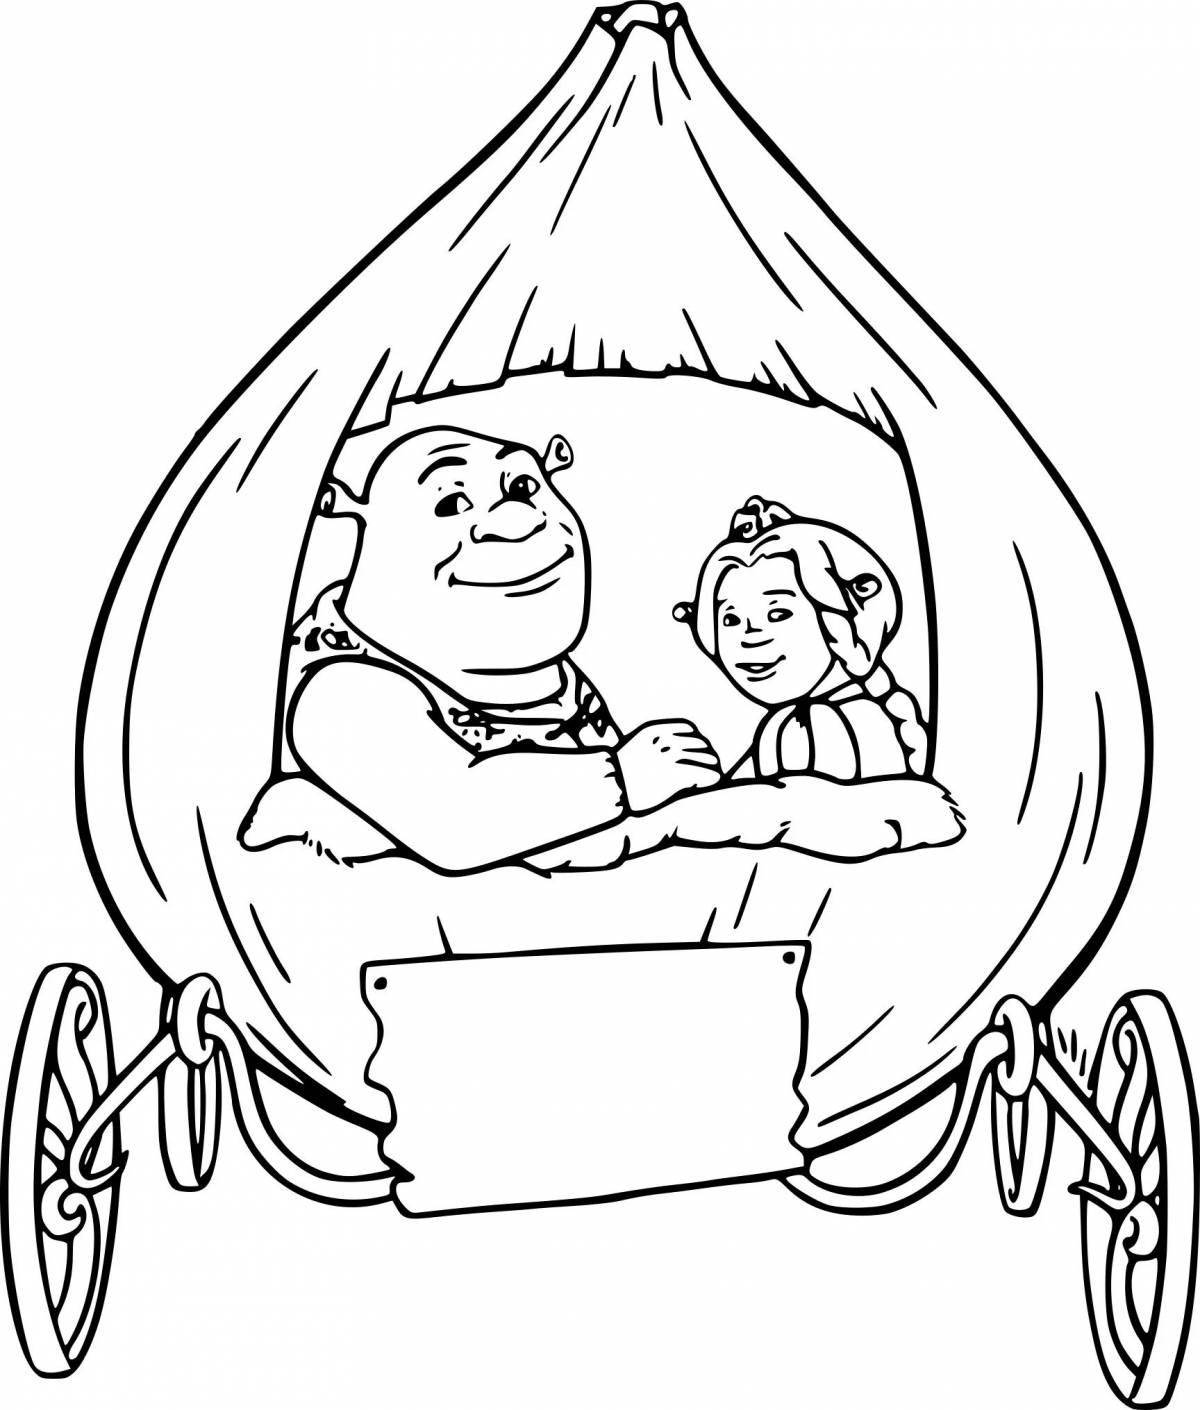 Gorgeous Shrek and Fiona coloring book